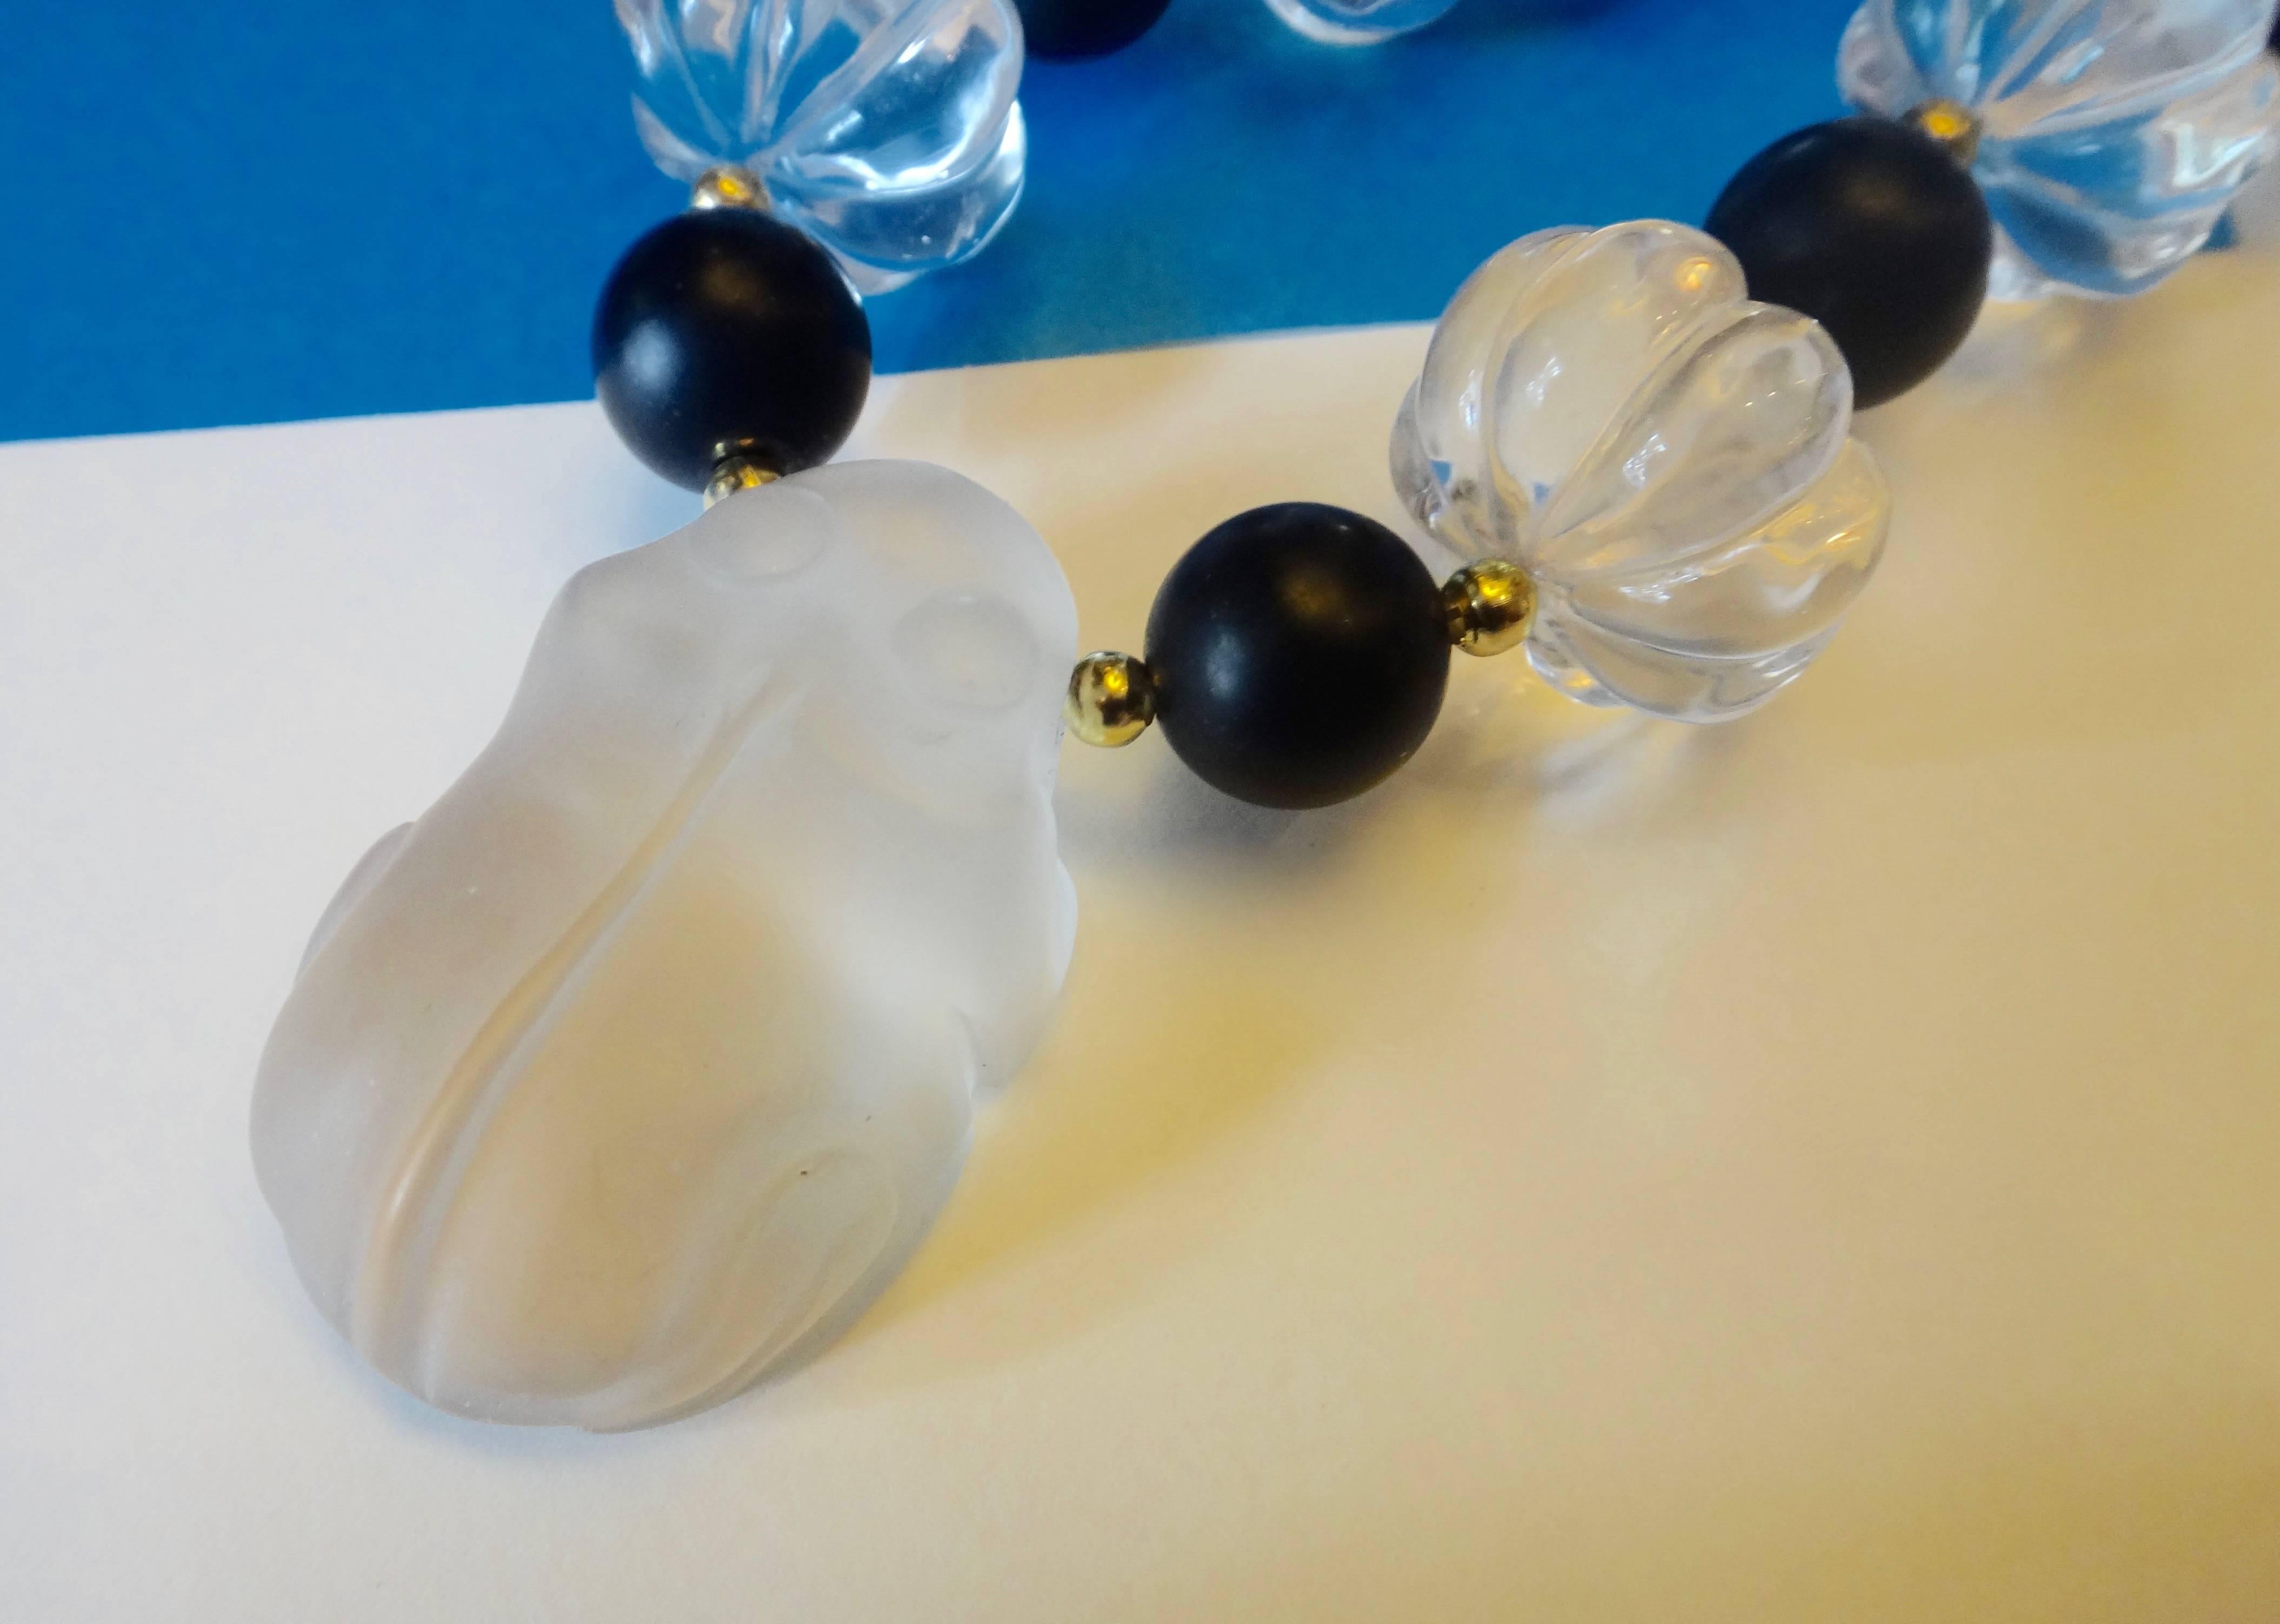 A sweetly sleeping frog carved from rock crystal in a frosted finish is the centerpiece of this necklace.  Further embellishing the piece are six melon carved rock crystal beads along with matte finished black onyx beads.  The necklace is finished